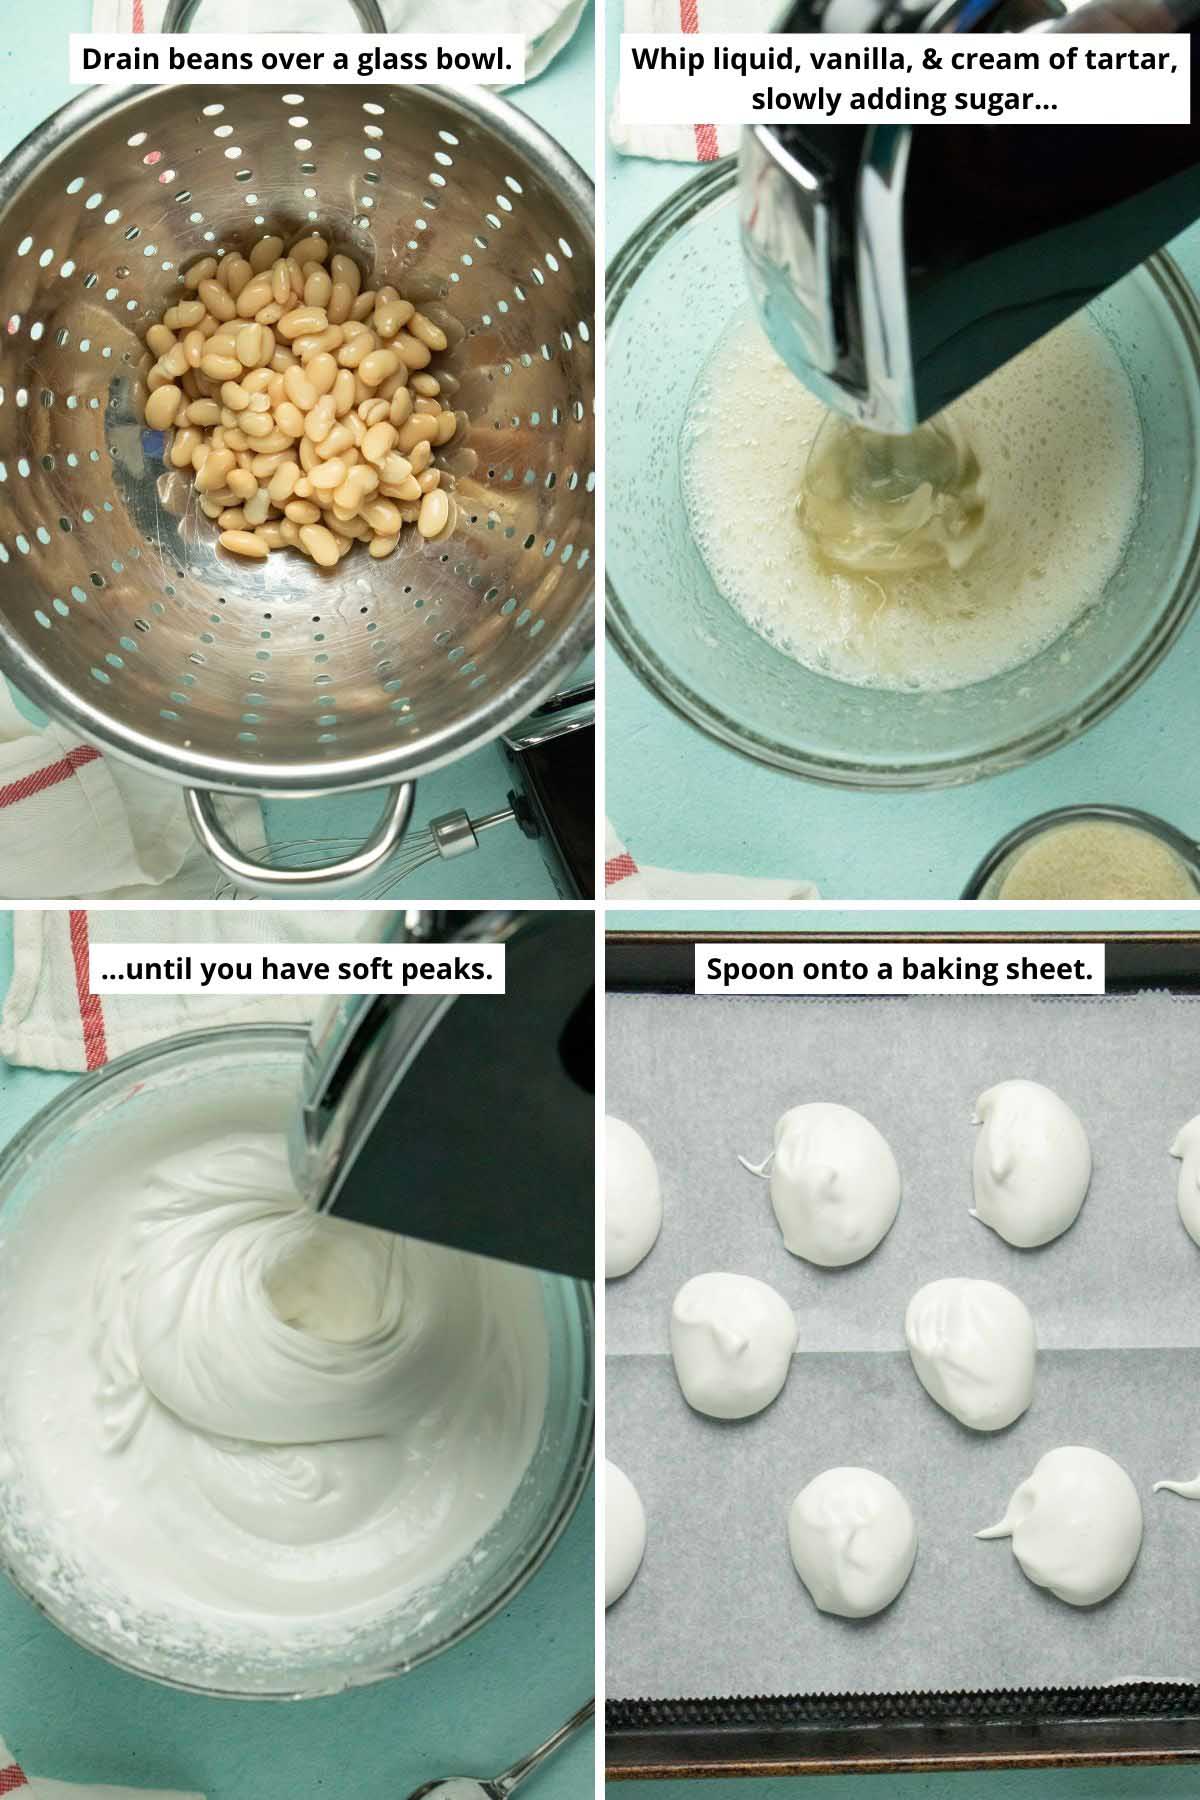 image collage showing draining the beans, whipping the aquafaba before and after it reaches soft peaks, and the vegan meringues on the baking sheet before baking